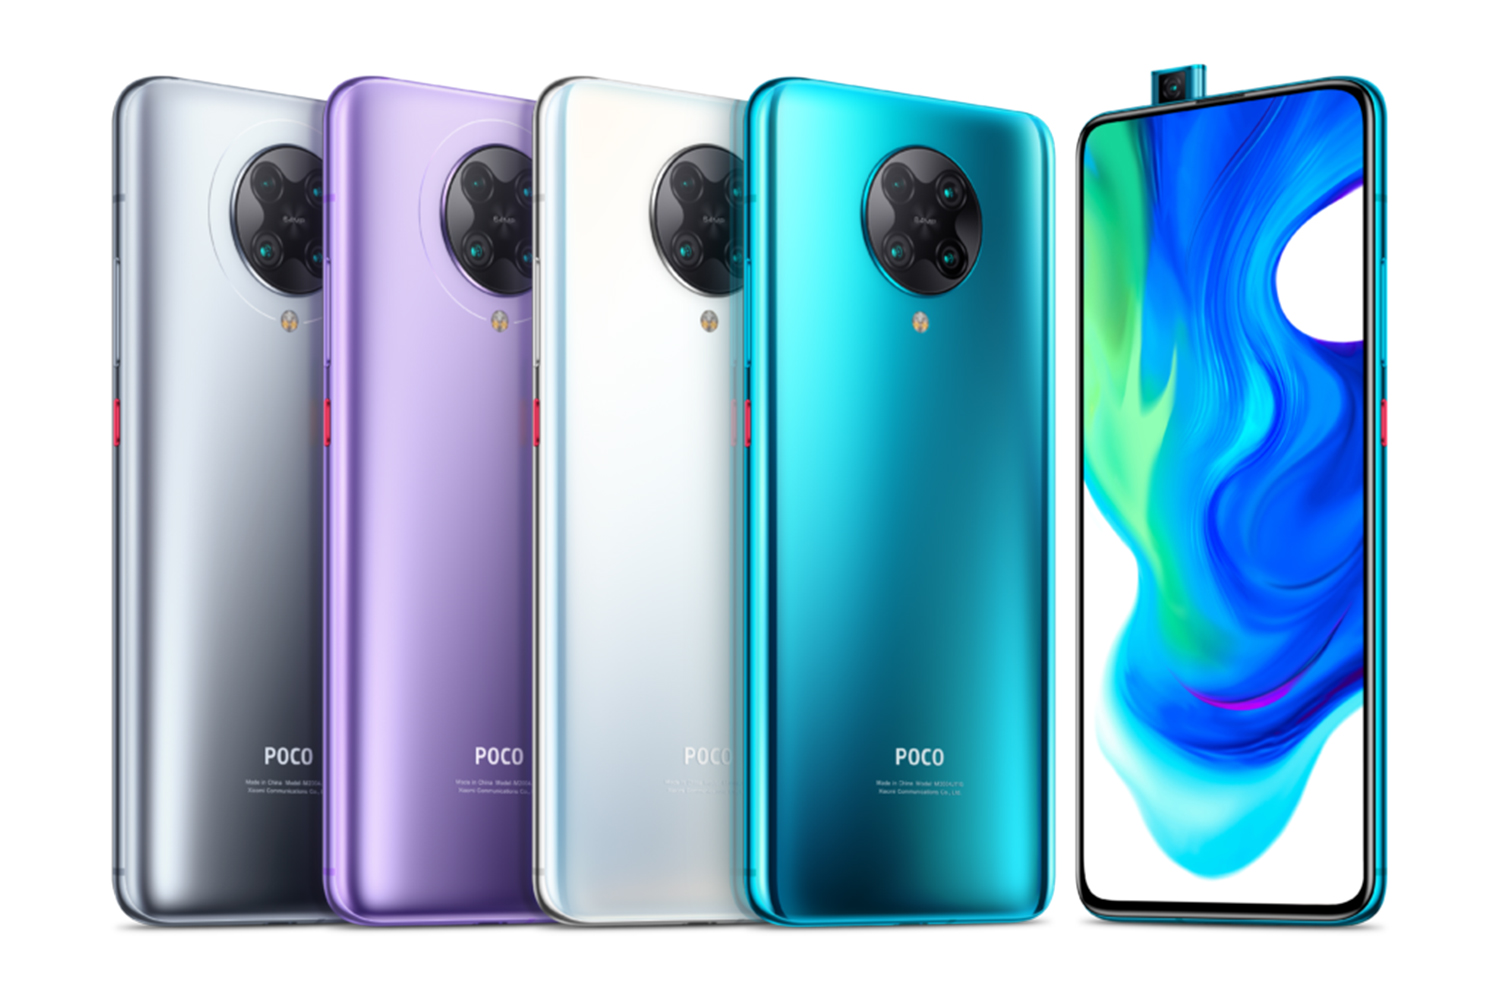 POCO F2 Pro To Be Available in Malaysia on 10th June